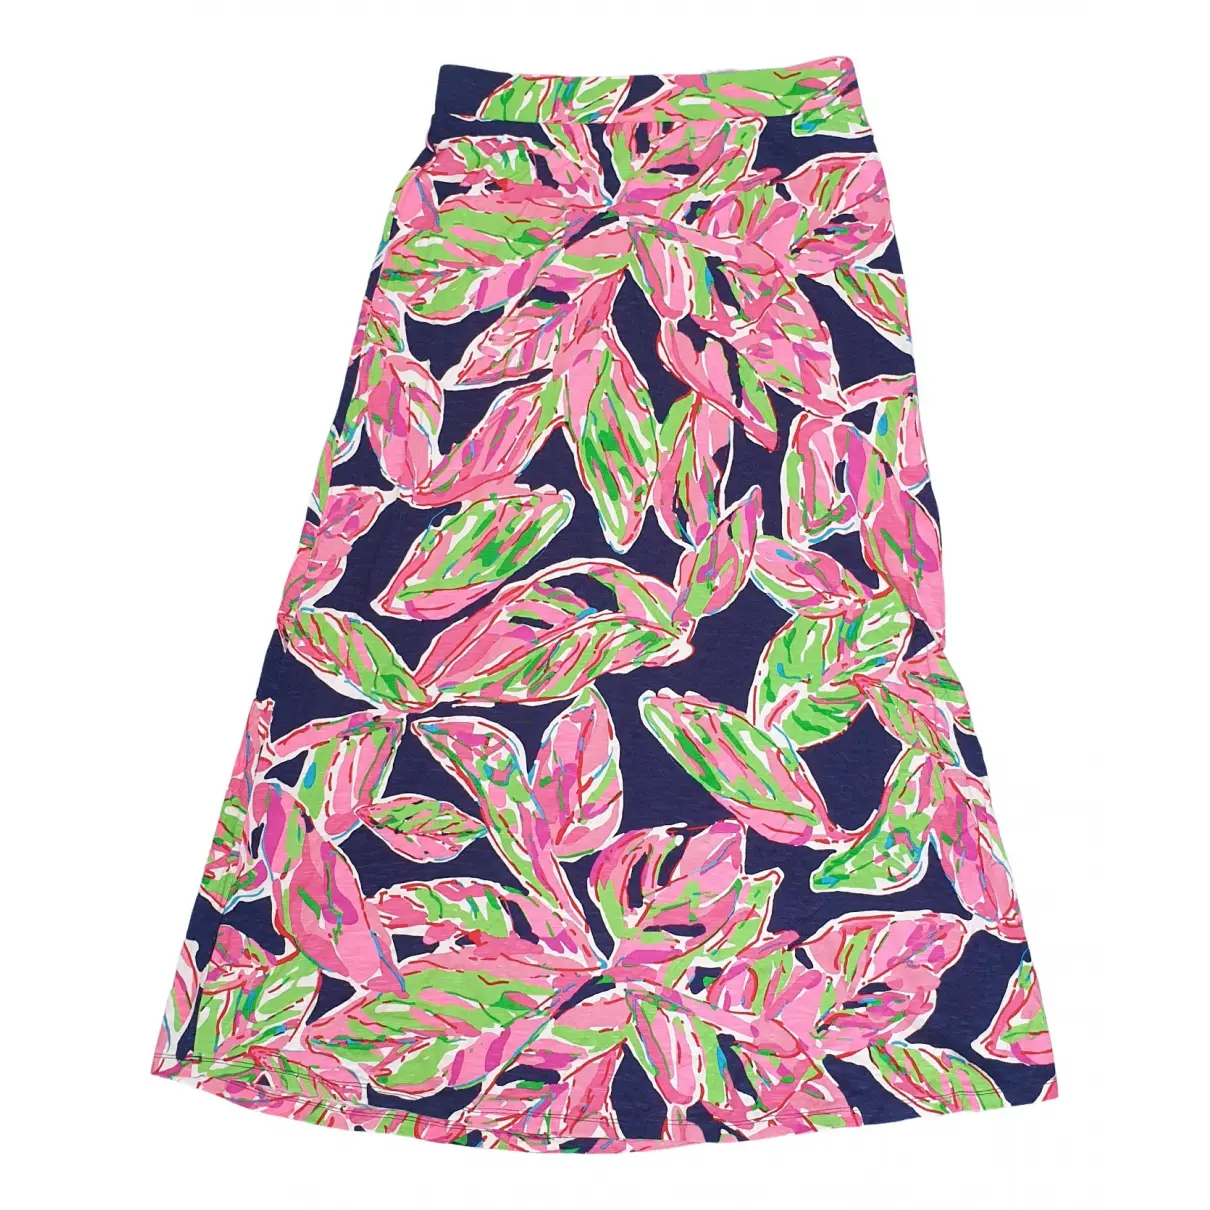 Maxi skirt Lilly Pulitzer